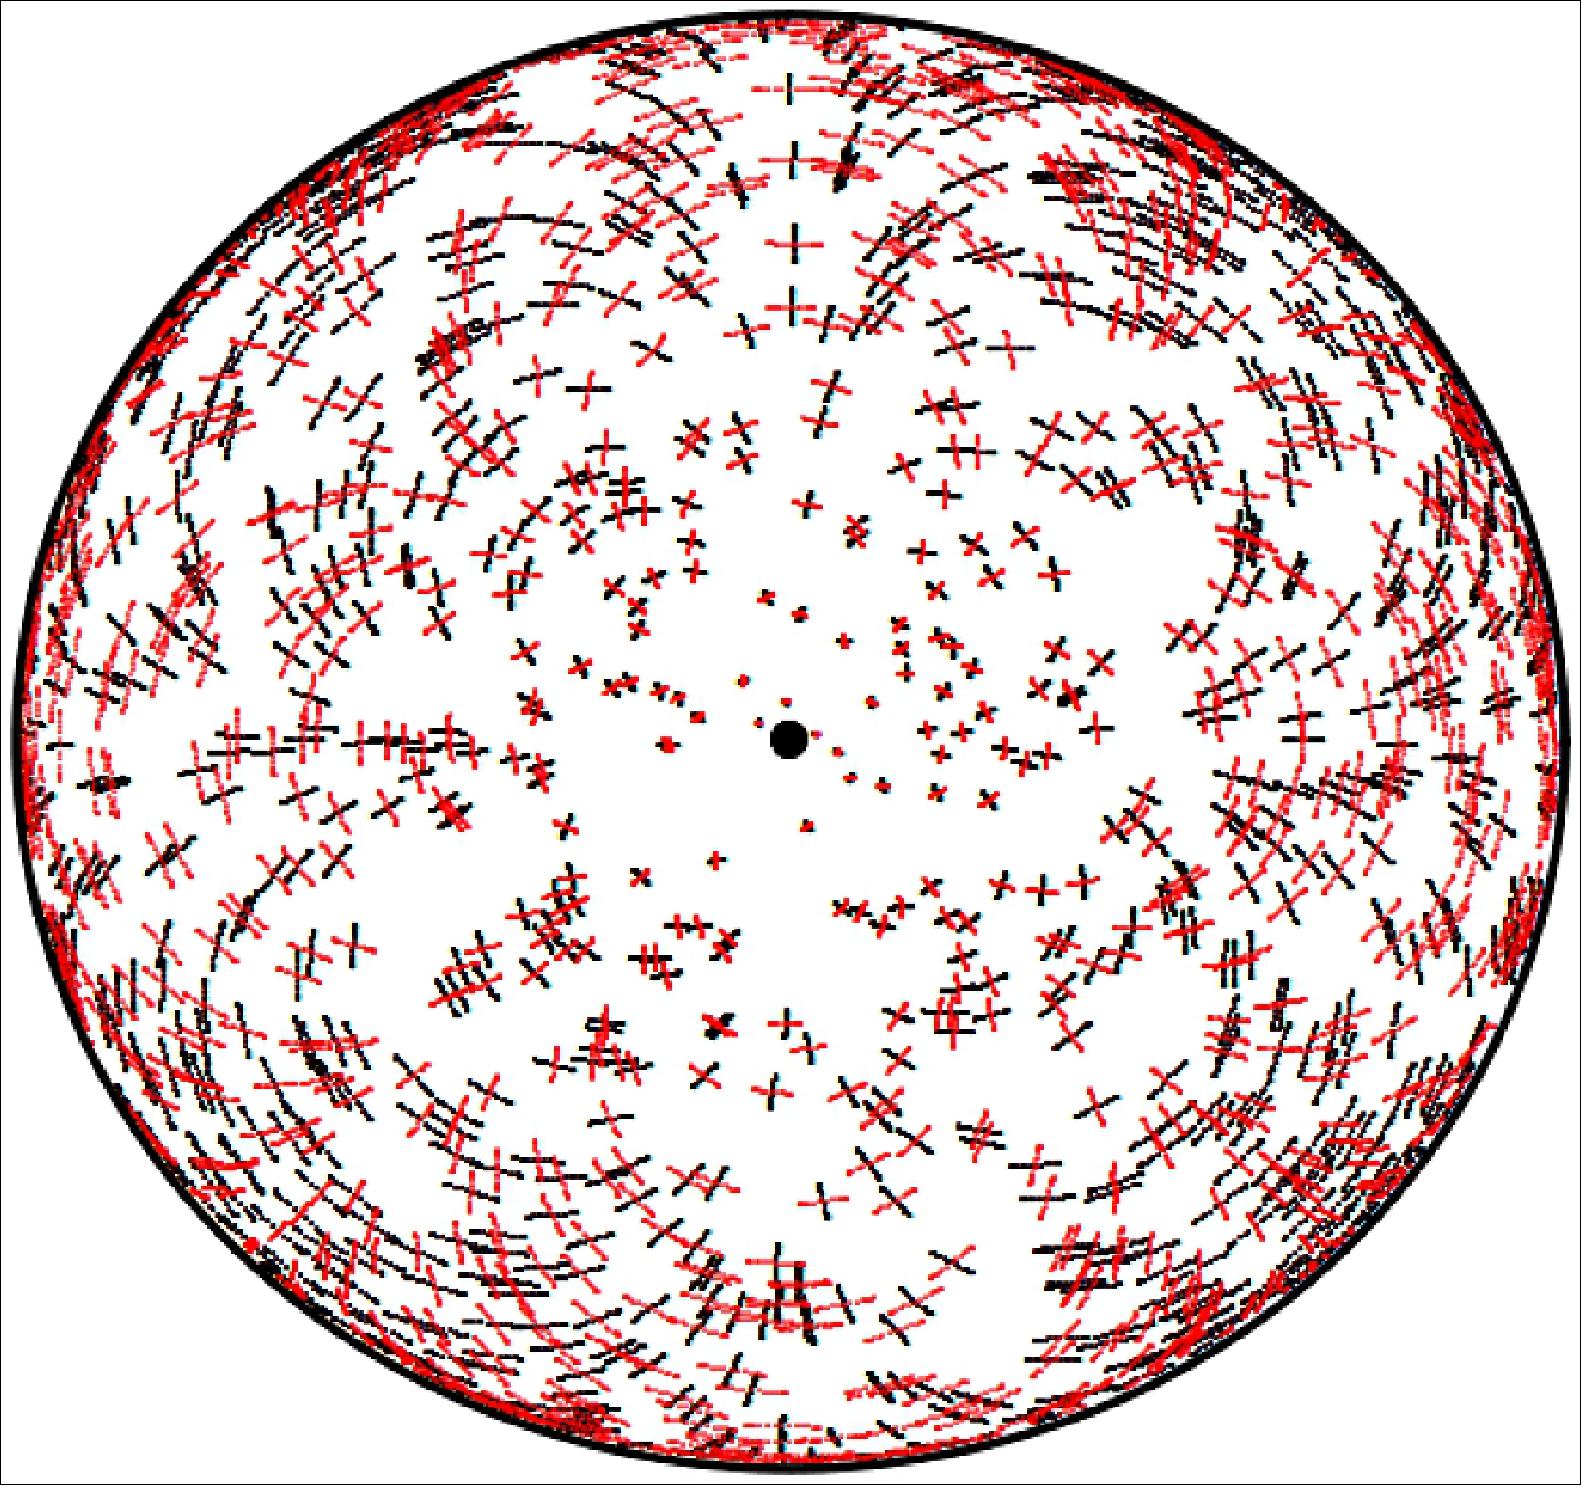 Figure 54: A Gaia star field, with red and black lines indicating induced apparent motions of the stars within a hemisphere (image credit: Kavli Institute for Cosmology, Cambridge)